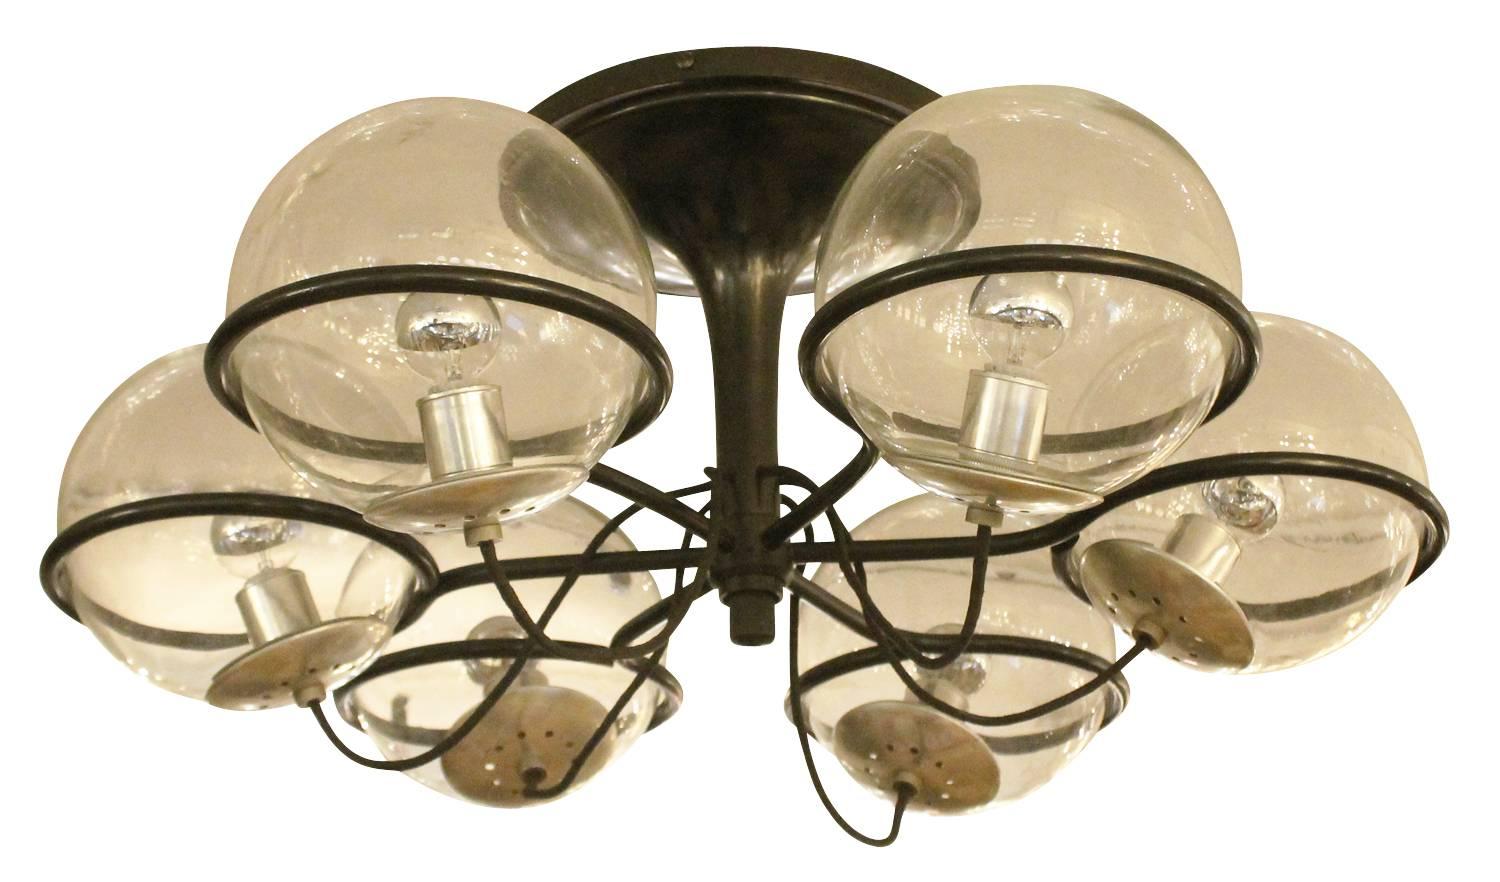 Six globe Arteluce chandelier designed by Gino Sarfatti in 1963. The globes are clear and the frame is black painted metal. Original label still present. Sconces and three globe chandeliers of the same series are also available.

Available for